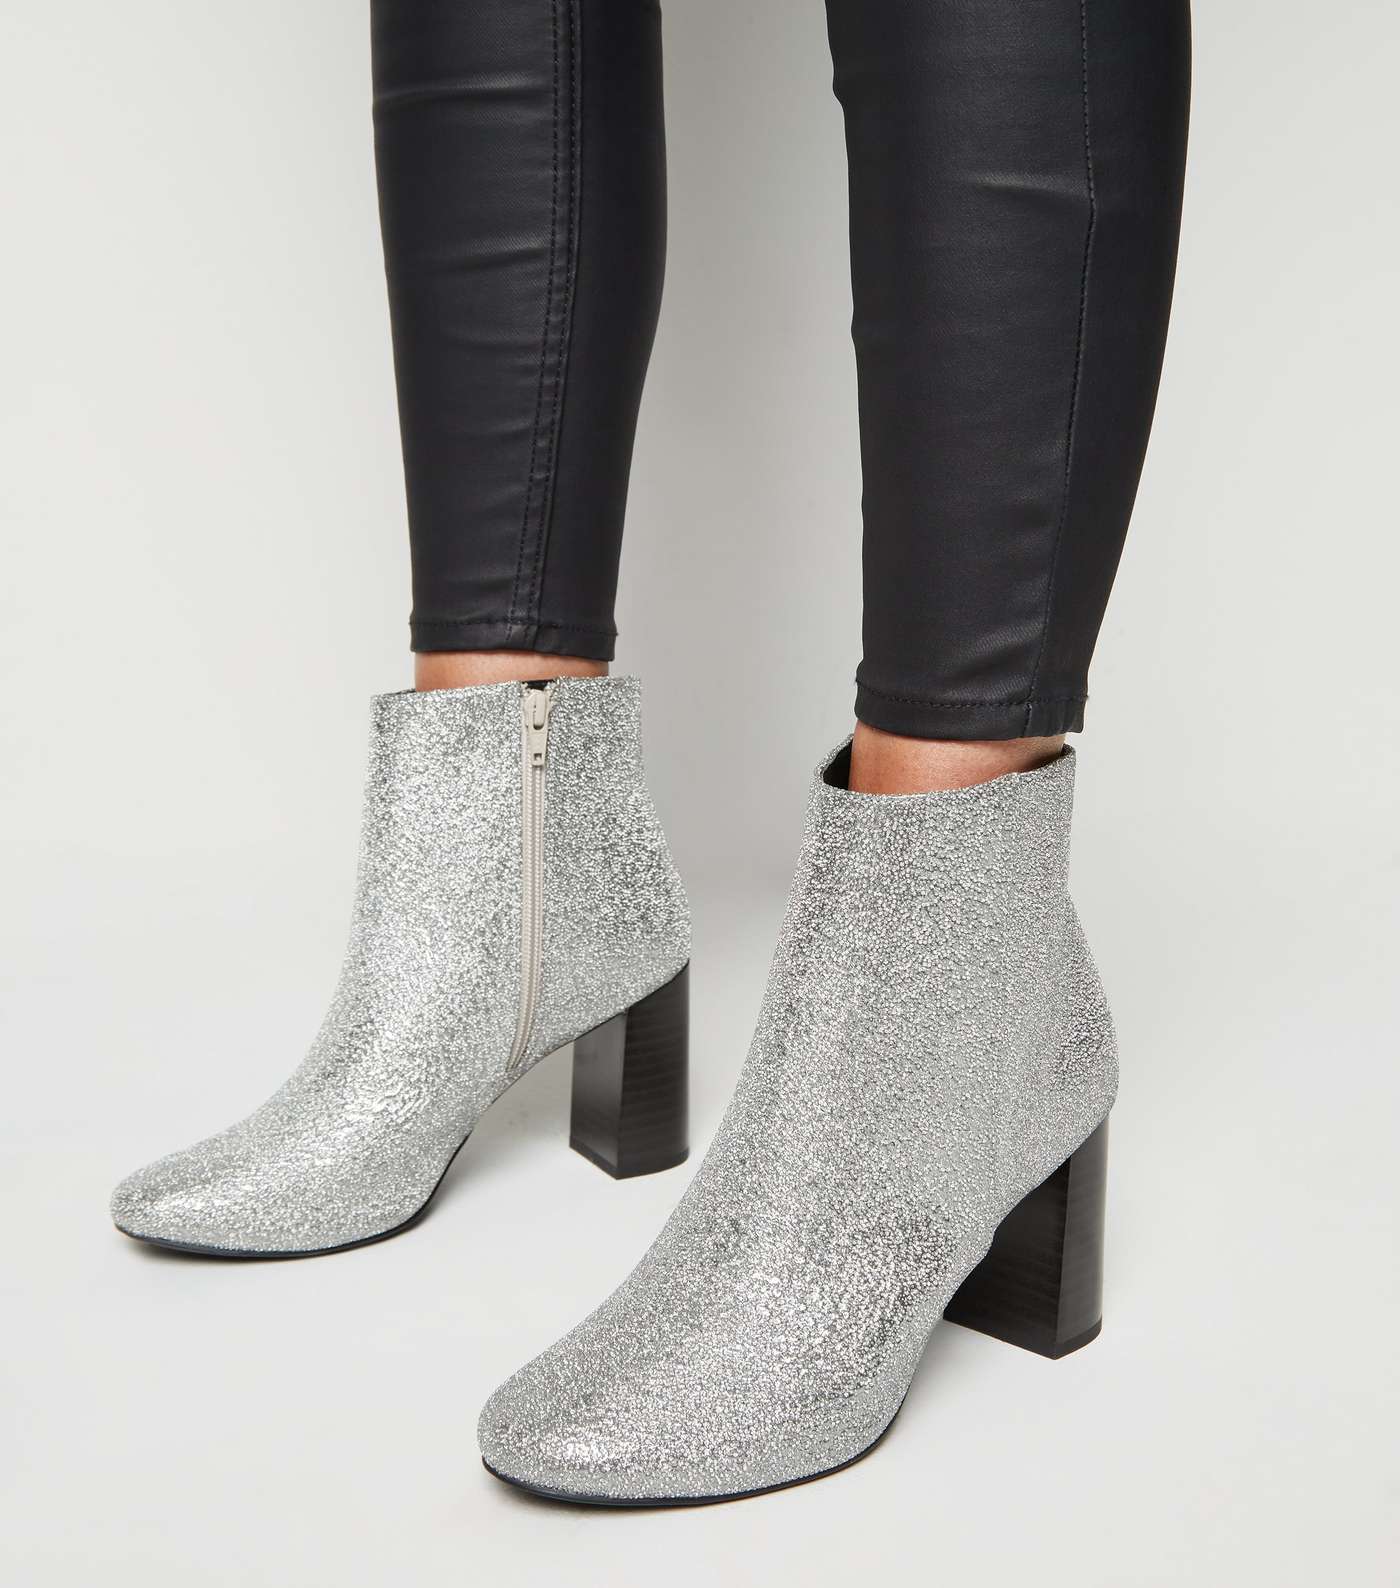 Silver Glitter Square Toe Heeled Ankle Boots Image 2